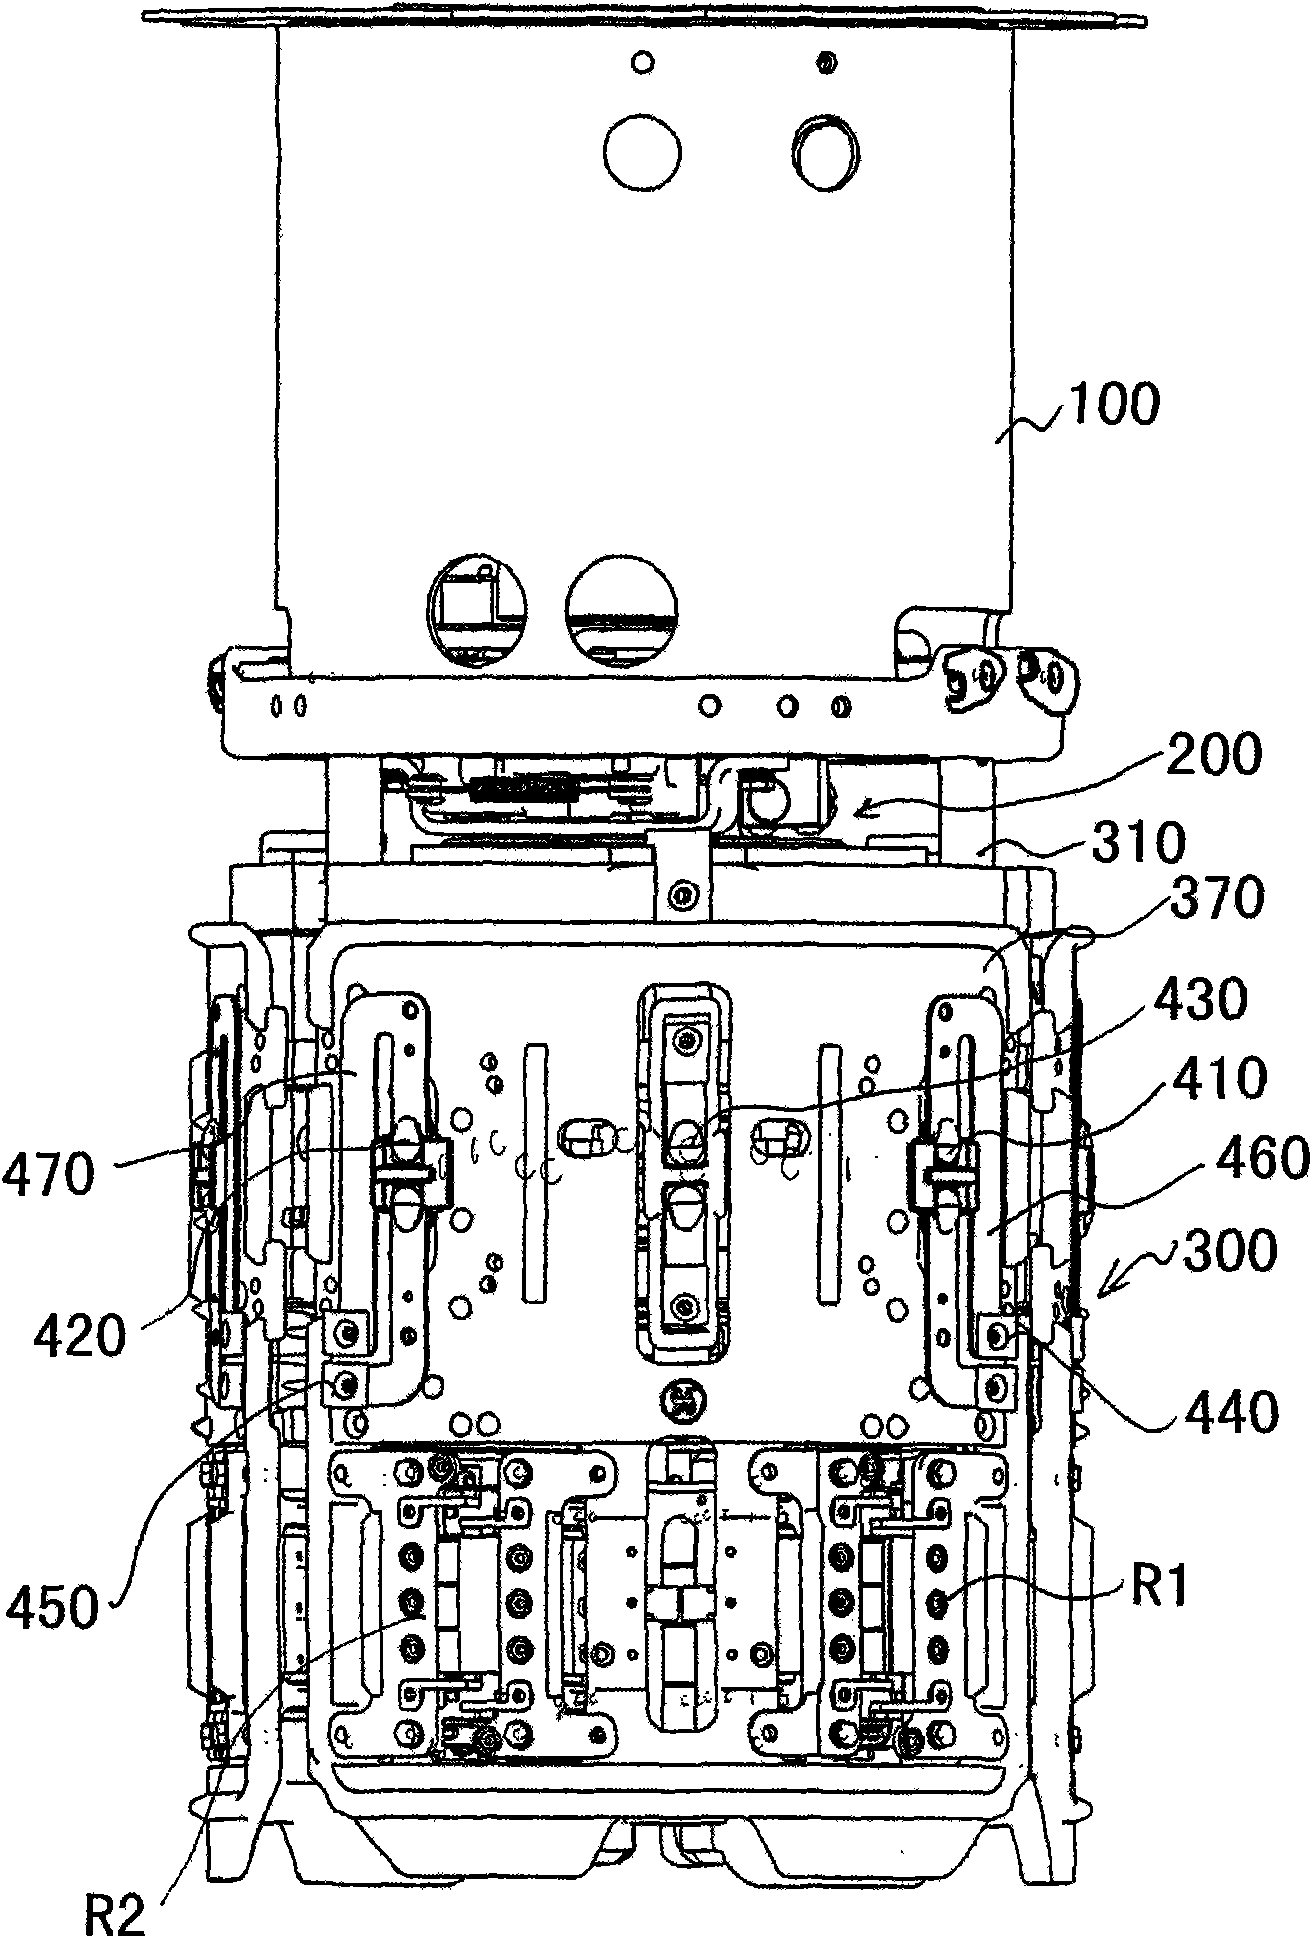 Vacuum vessel switching core used by on-load tap-changer